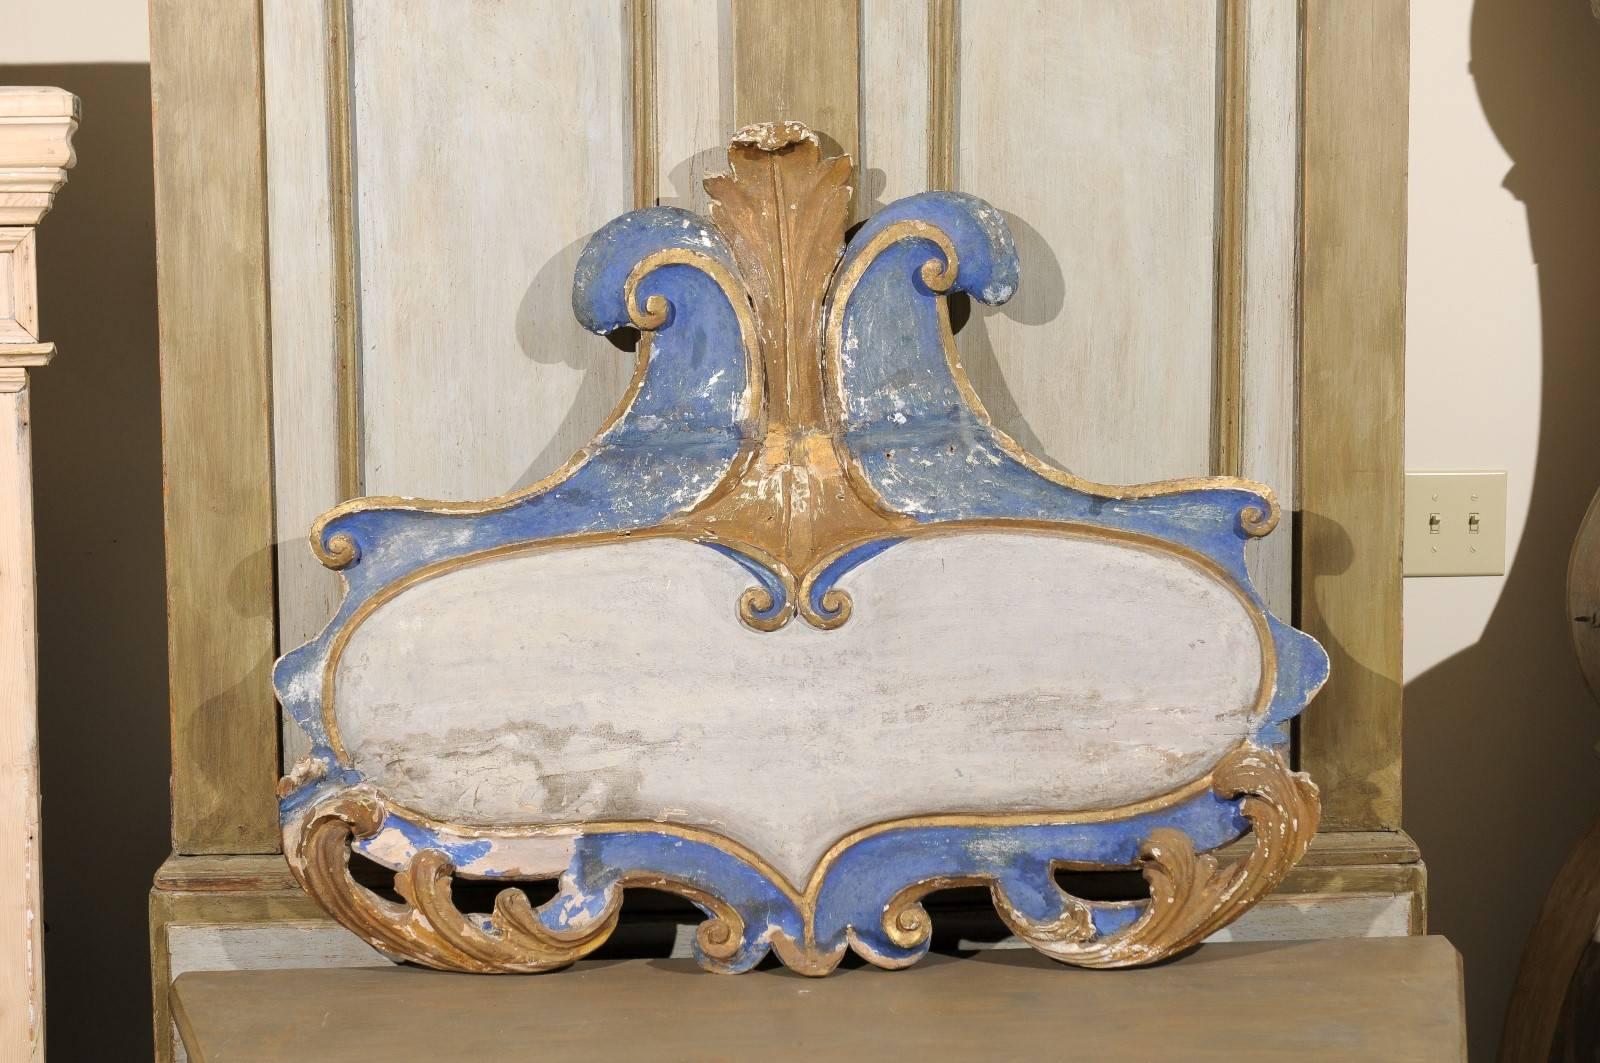 A 19th century Italian rococo style carved wooden cartouche wall decoration with original paint. This Italian wall ornament features two volutes in its crest from which stems an acanthus leaf, echoed in the lower part on each side. Very nice